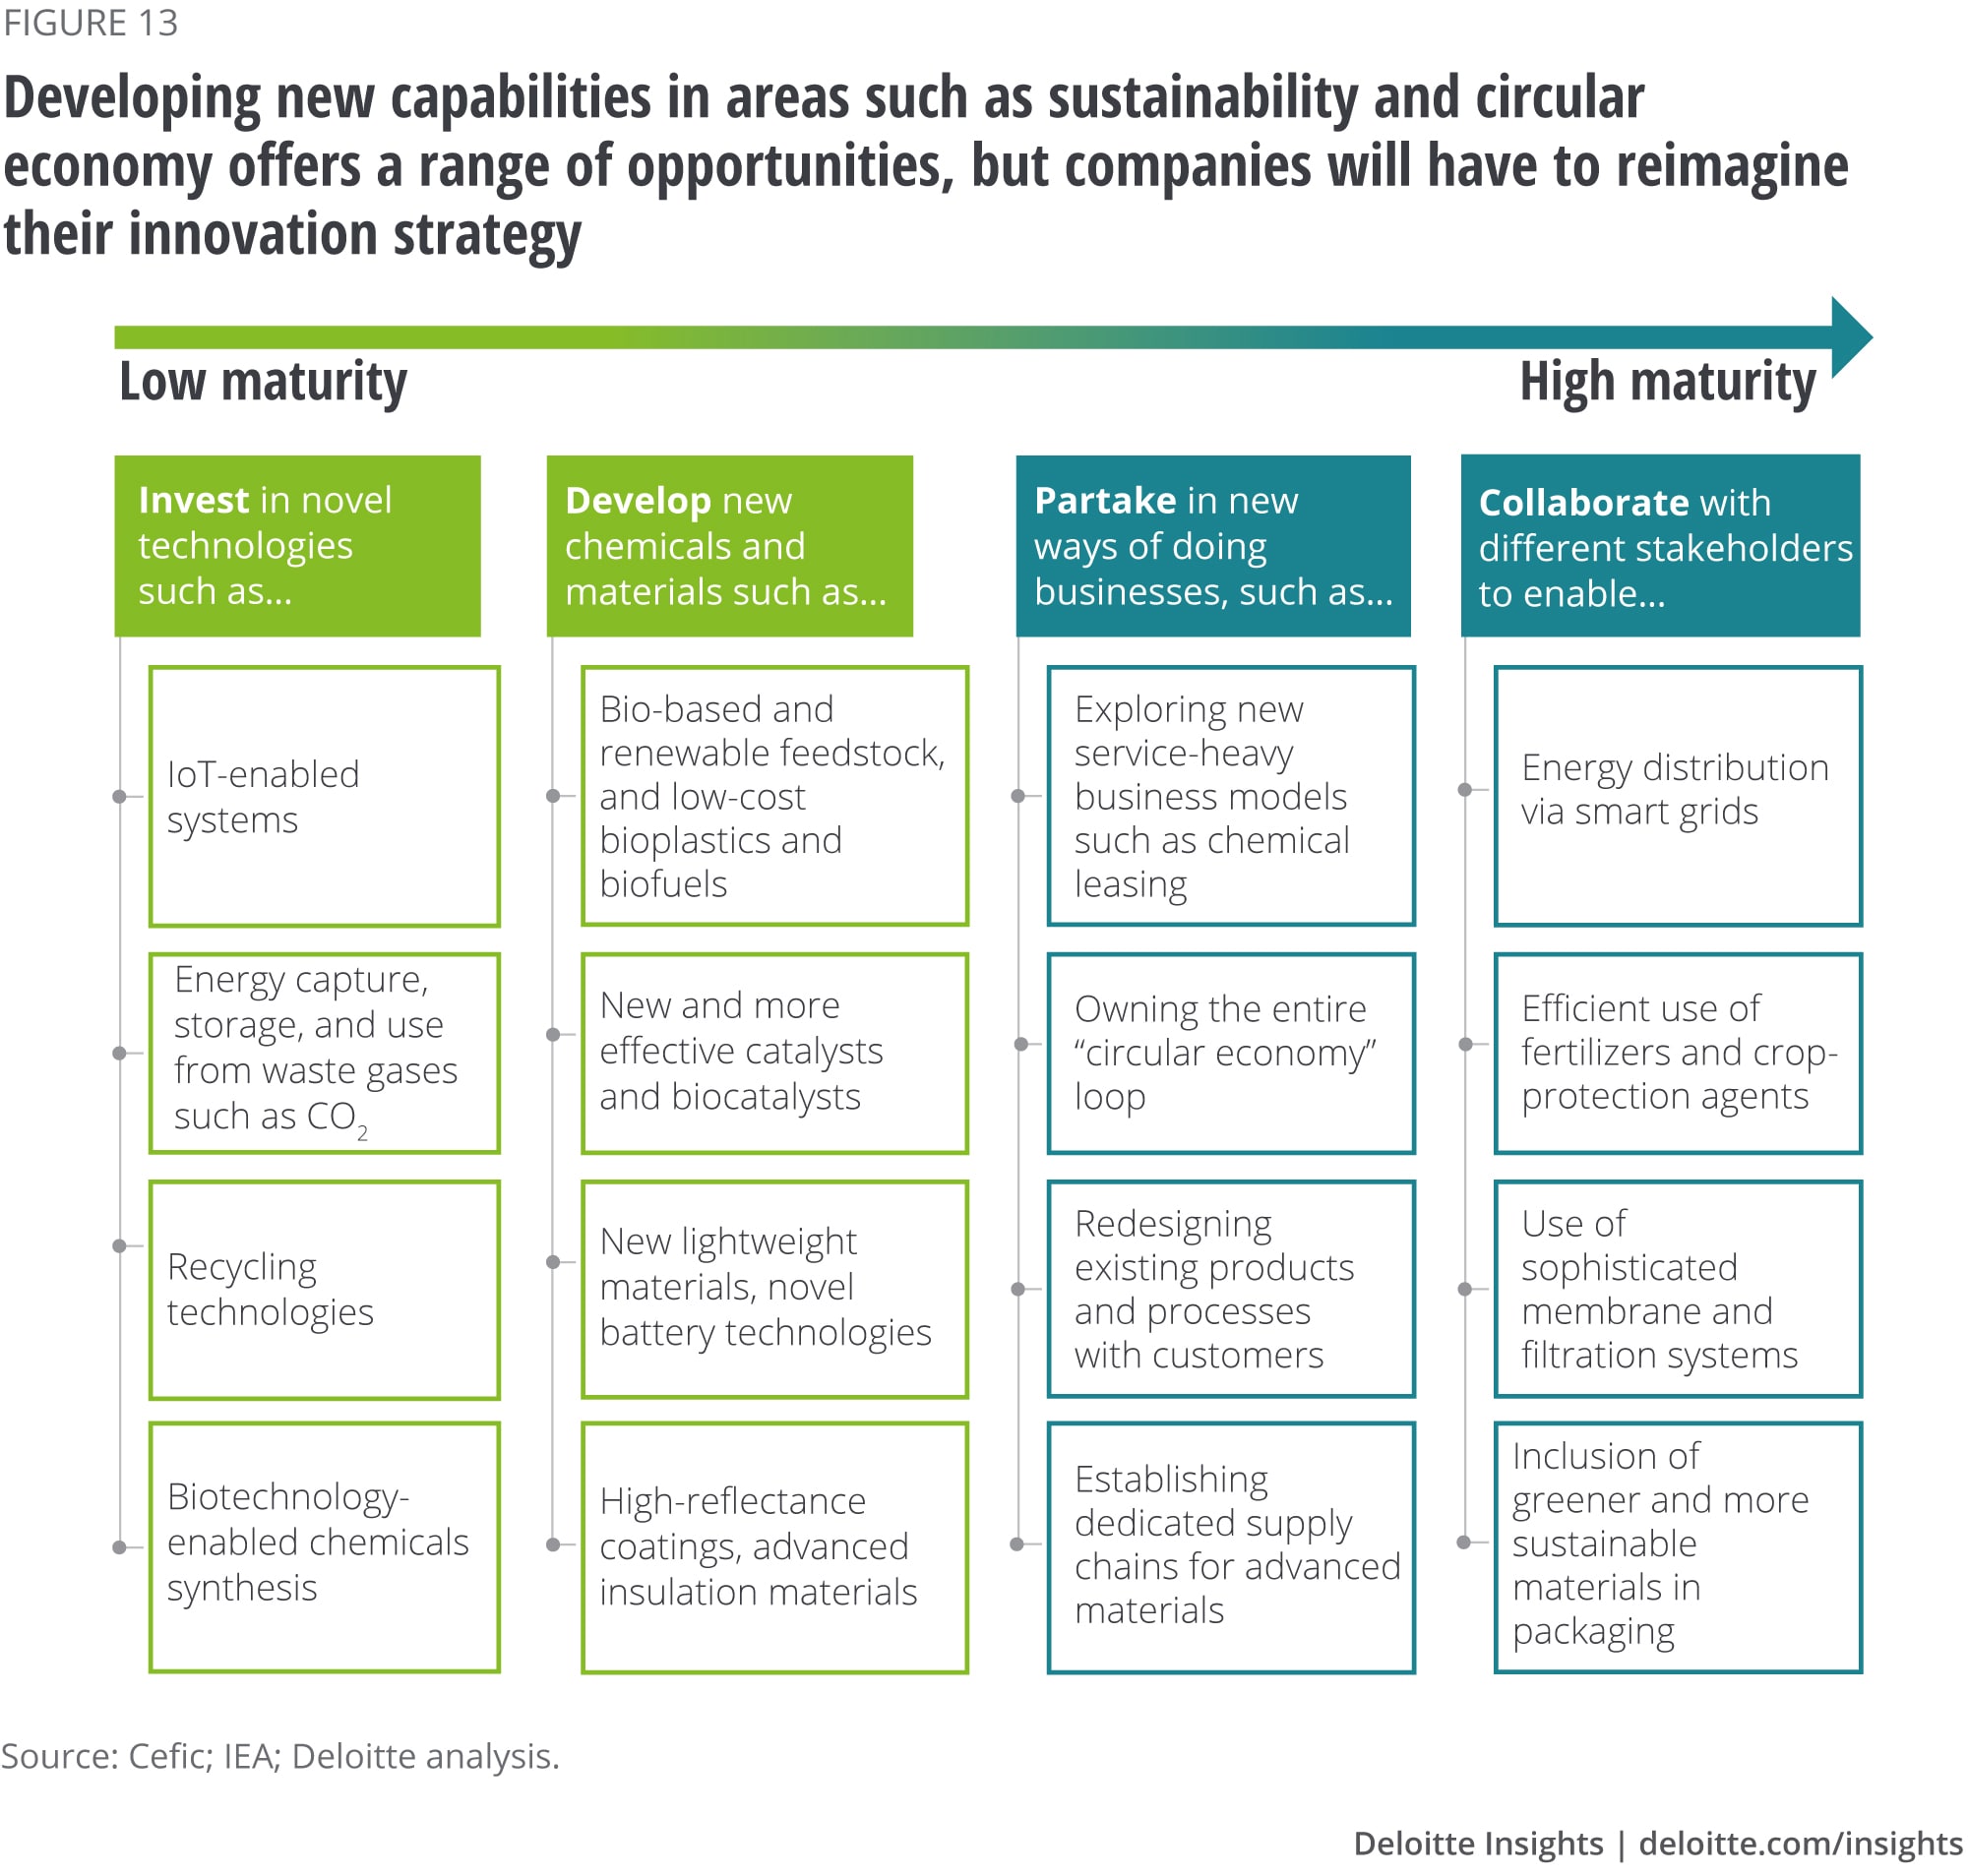 Developing new capabilities in areas such as sustainability and circular economy offers a range of opportunities, but companies will have to reimagine their innovation strategy